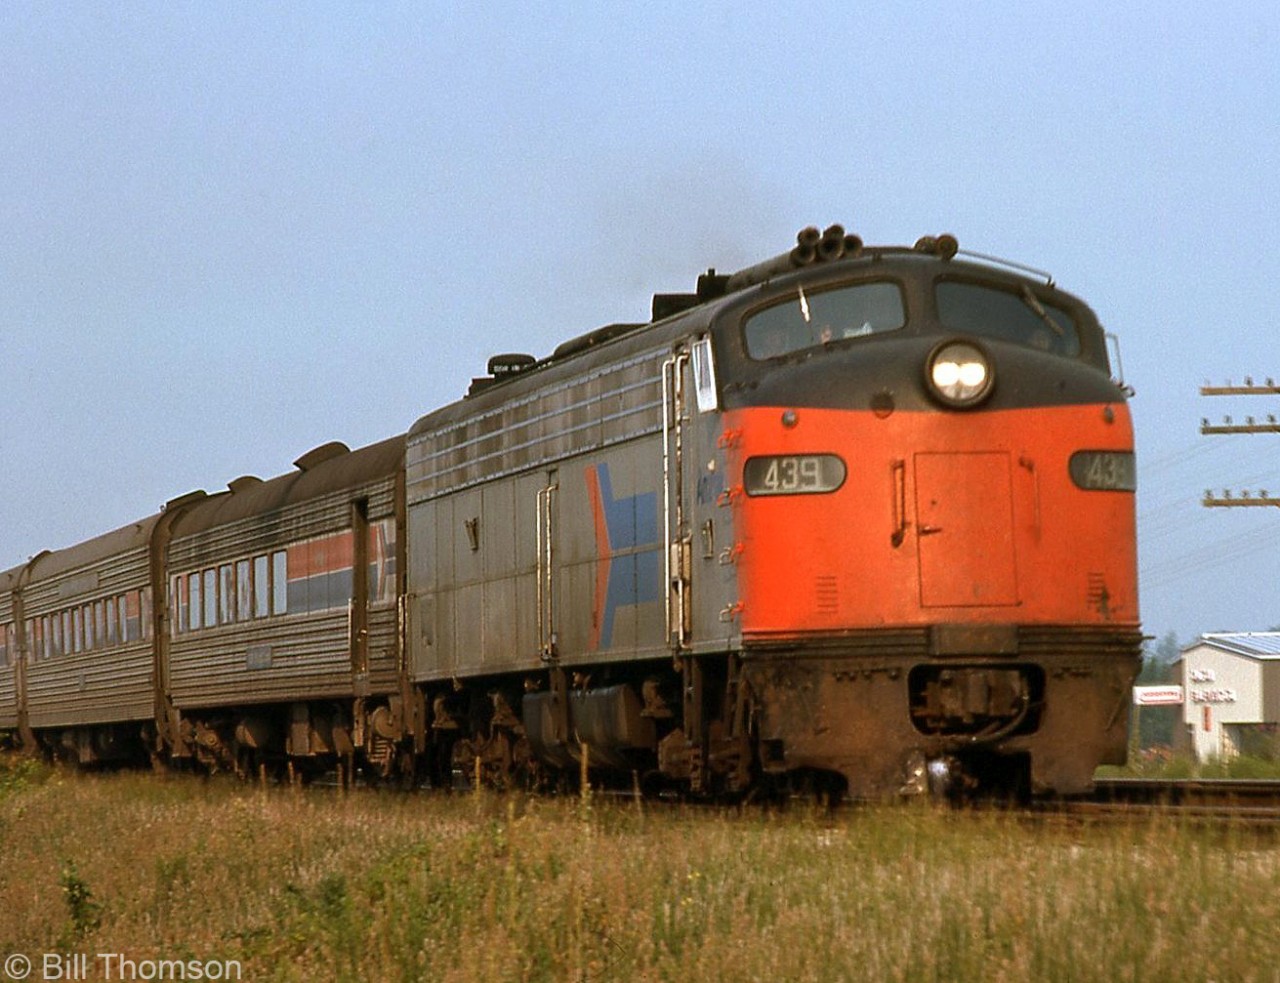 When Amtrak was formed to take over passenger services from railroads in America it acquired a varied fleet of secondhand passenger cars and locomotives, including an assortment of EMD E-units from a few different roads. Here, Amtrak E8A 439 (formerly Richmond, Fredericksburg and Potomac RR 1007, repainted in the early Amtrak livery) hurries the Niagara Rainbow through Tilbury, Ontario over the Conrail CASO Sub in August 1976.